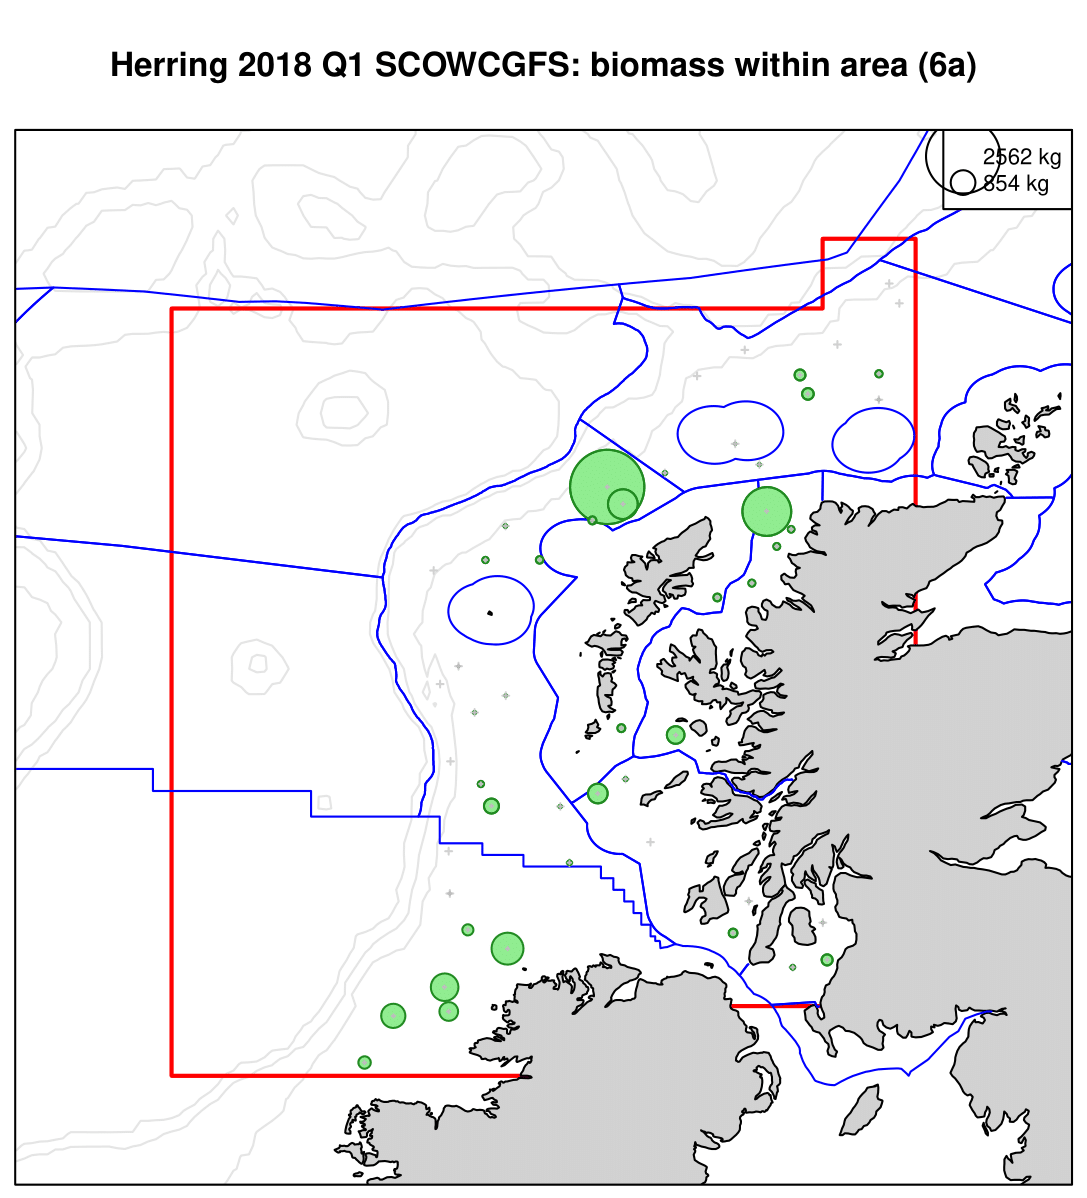 Herring 2018 Q1 SCOWCGFS: biomass within area 6a